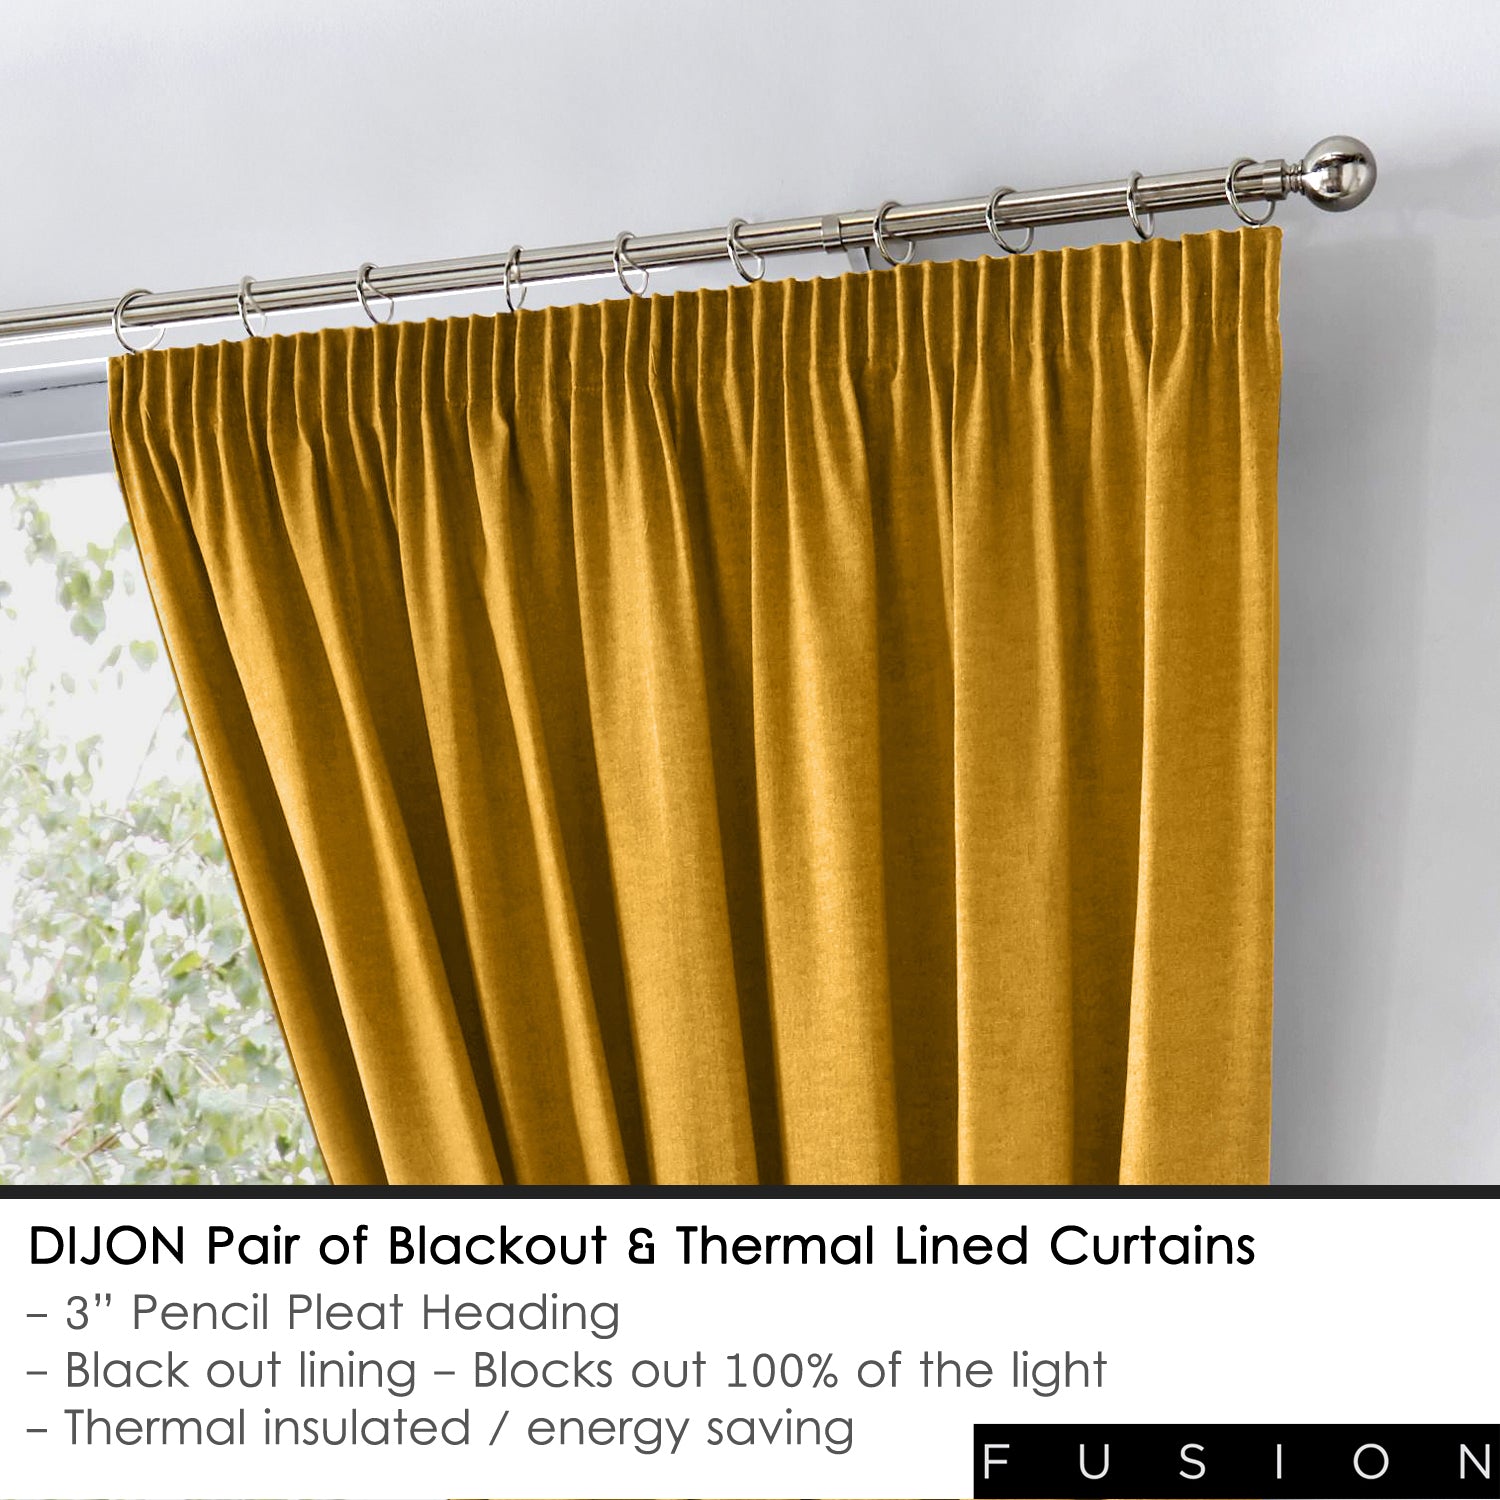 Dijon - Blackout Pair of Pencil Pleat Curtains in Ochre - by Fusion